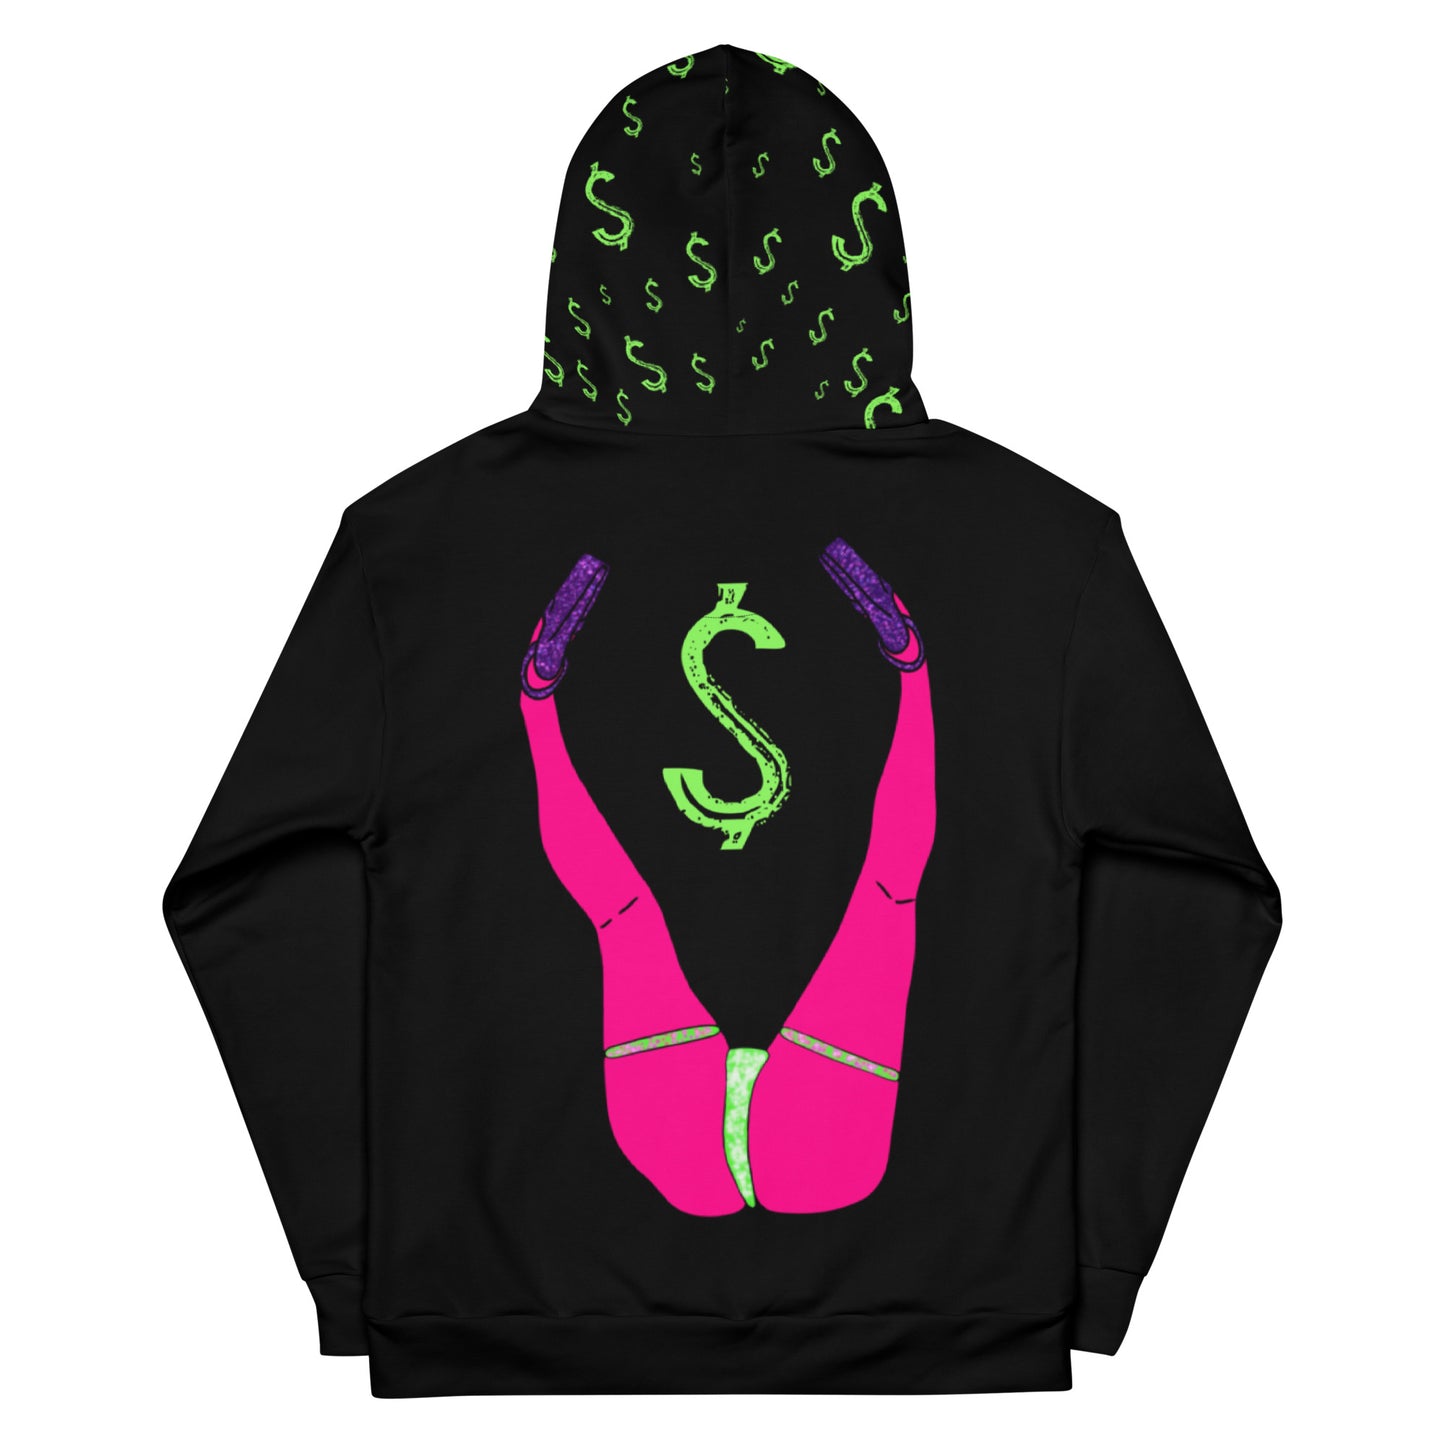 "Cuntrover$ial" by Nova Caine - Hoodie